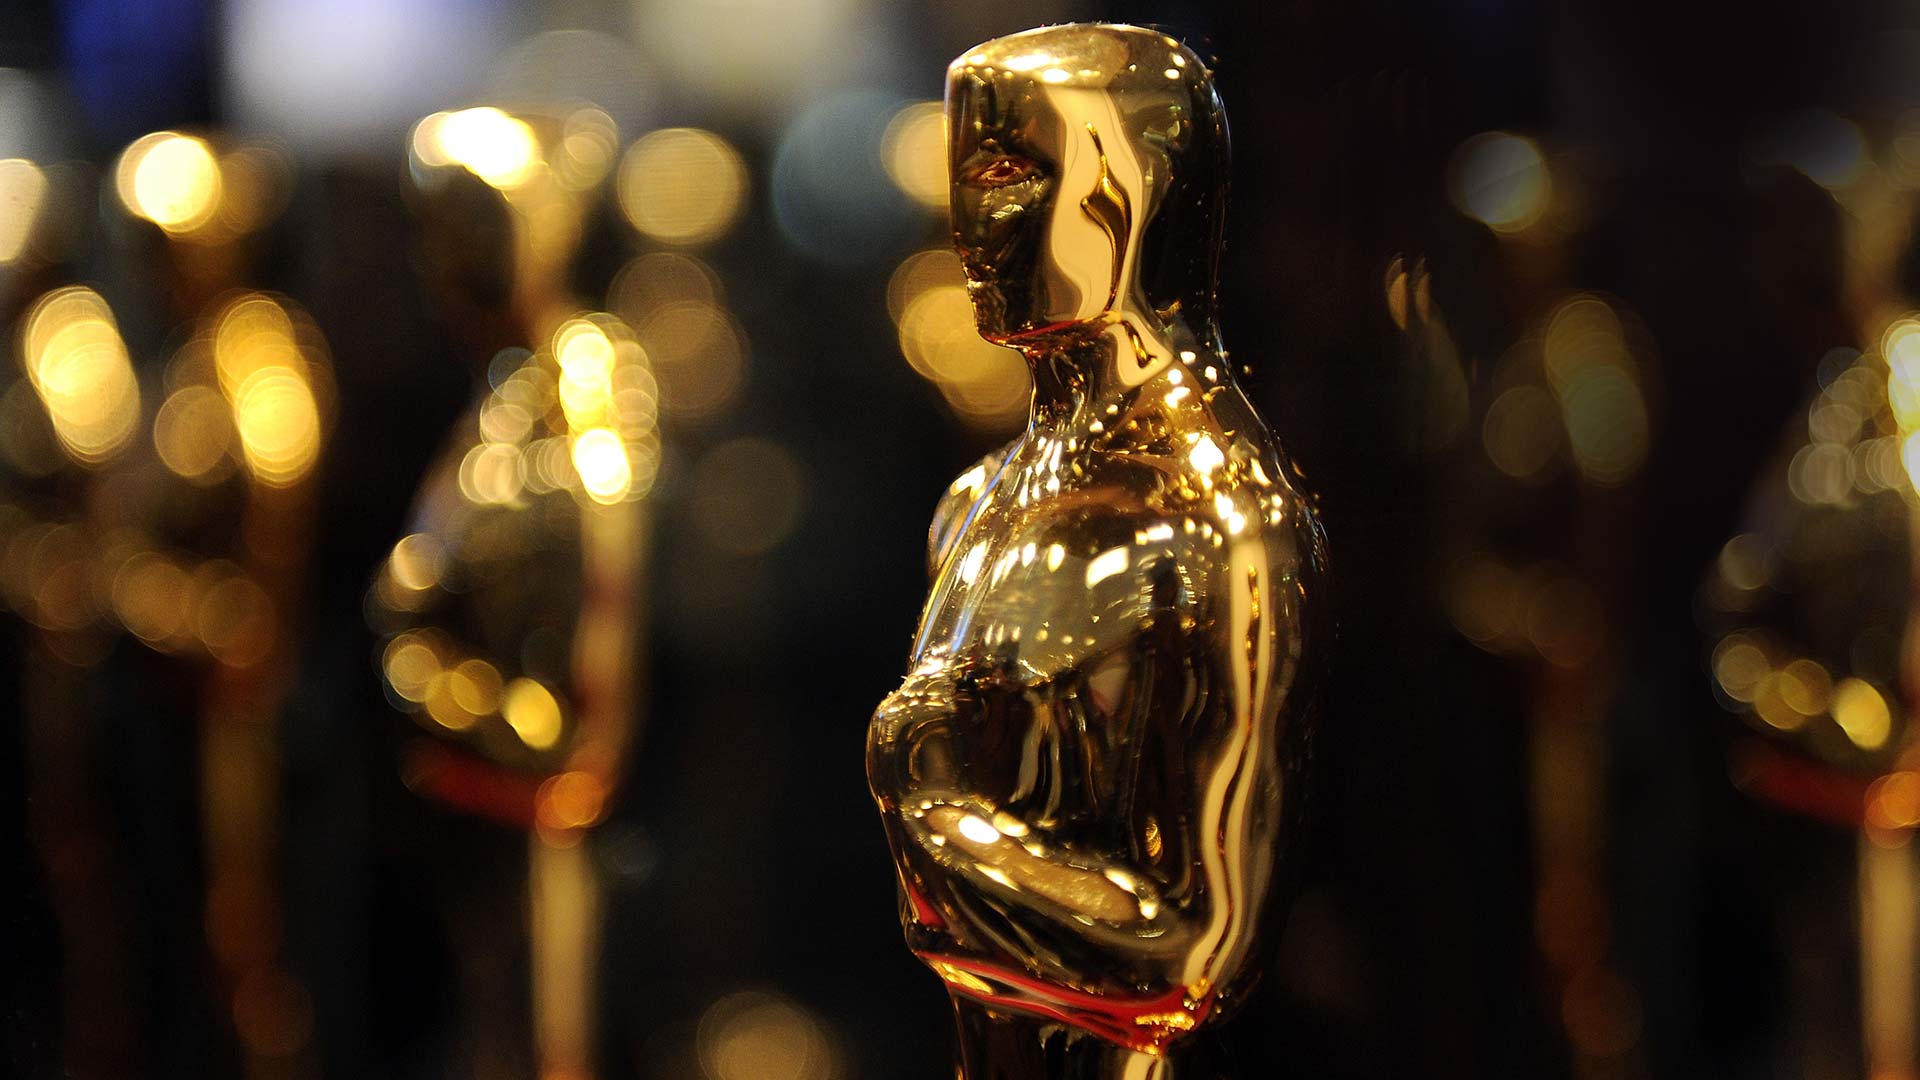 Oscars Awards Will Not Be Presented Live During This